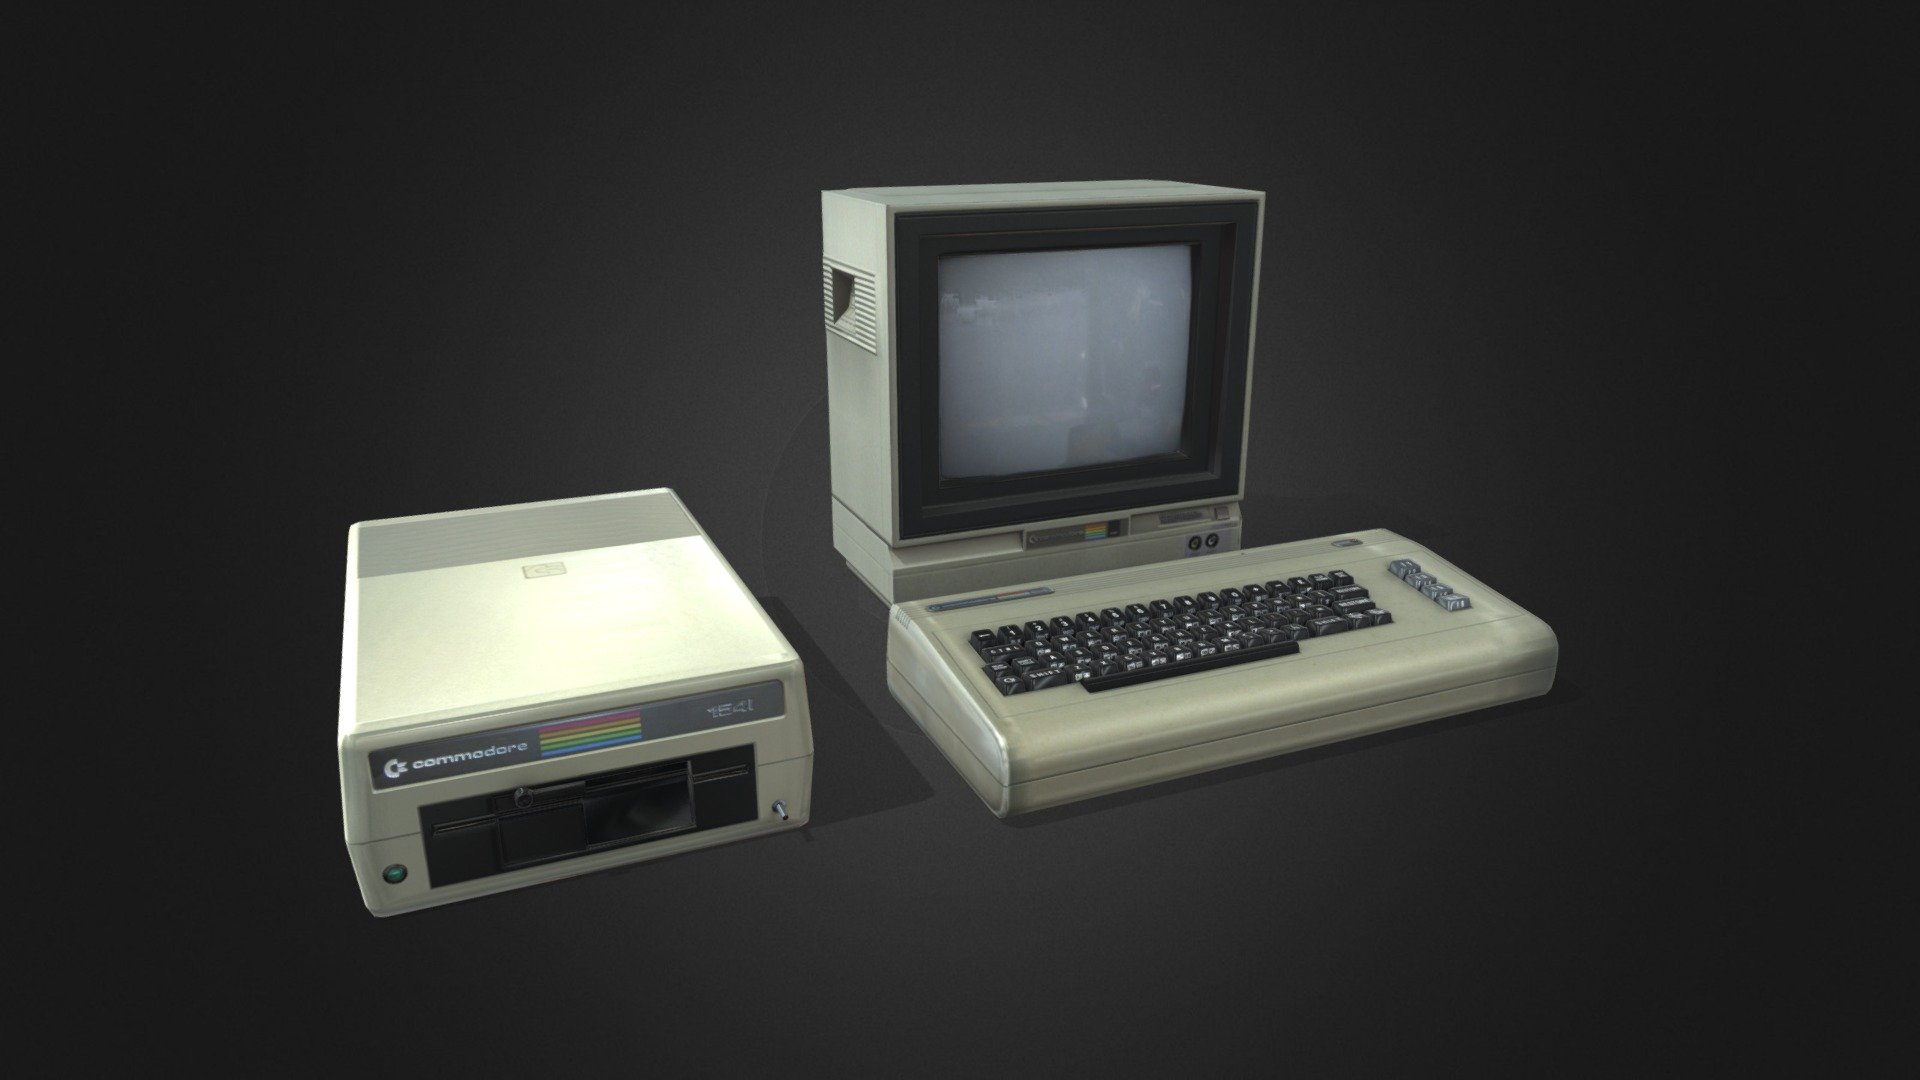 3D model the Commodore 64- Vintage Computer 80s

PBR Materials
Game Ready
FBX

The Commodore 64, also known as the C64 or the CBM 64, is an 8-bit home computer introduced in January 1982 by Commodore International (first shown at the Consumer Electronics Show, in Las Vegas, January 7–10, 1982). It has been listed in the Guinness World Records as the highest-selling single computer model of all time, with independent estimates placing the number sold between 10 and 17 million units.[2] Volume production started in early 1982, marketing in August for US$595 (equivalent to $1,576 in 2019) 3d model